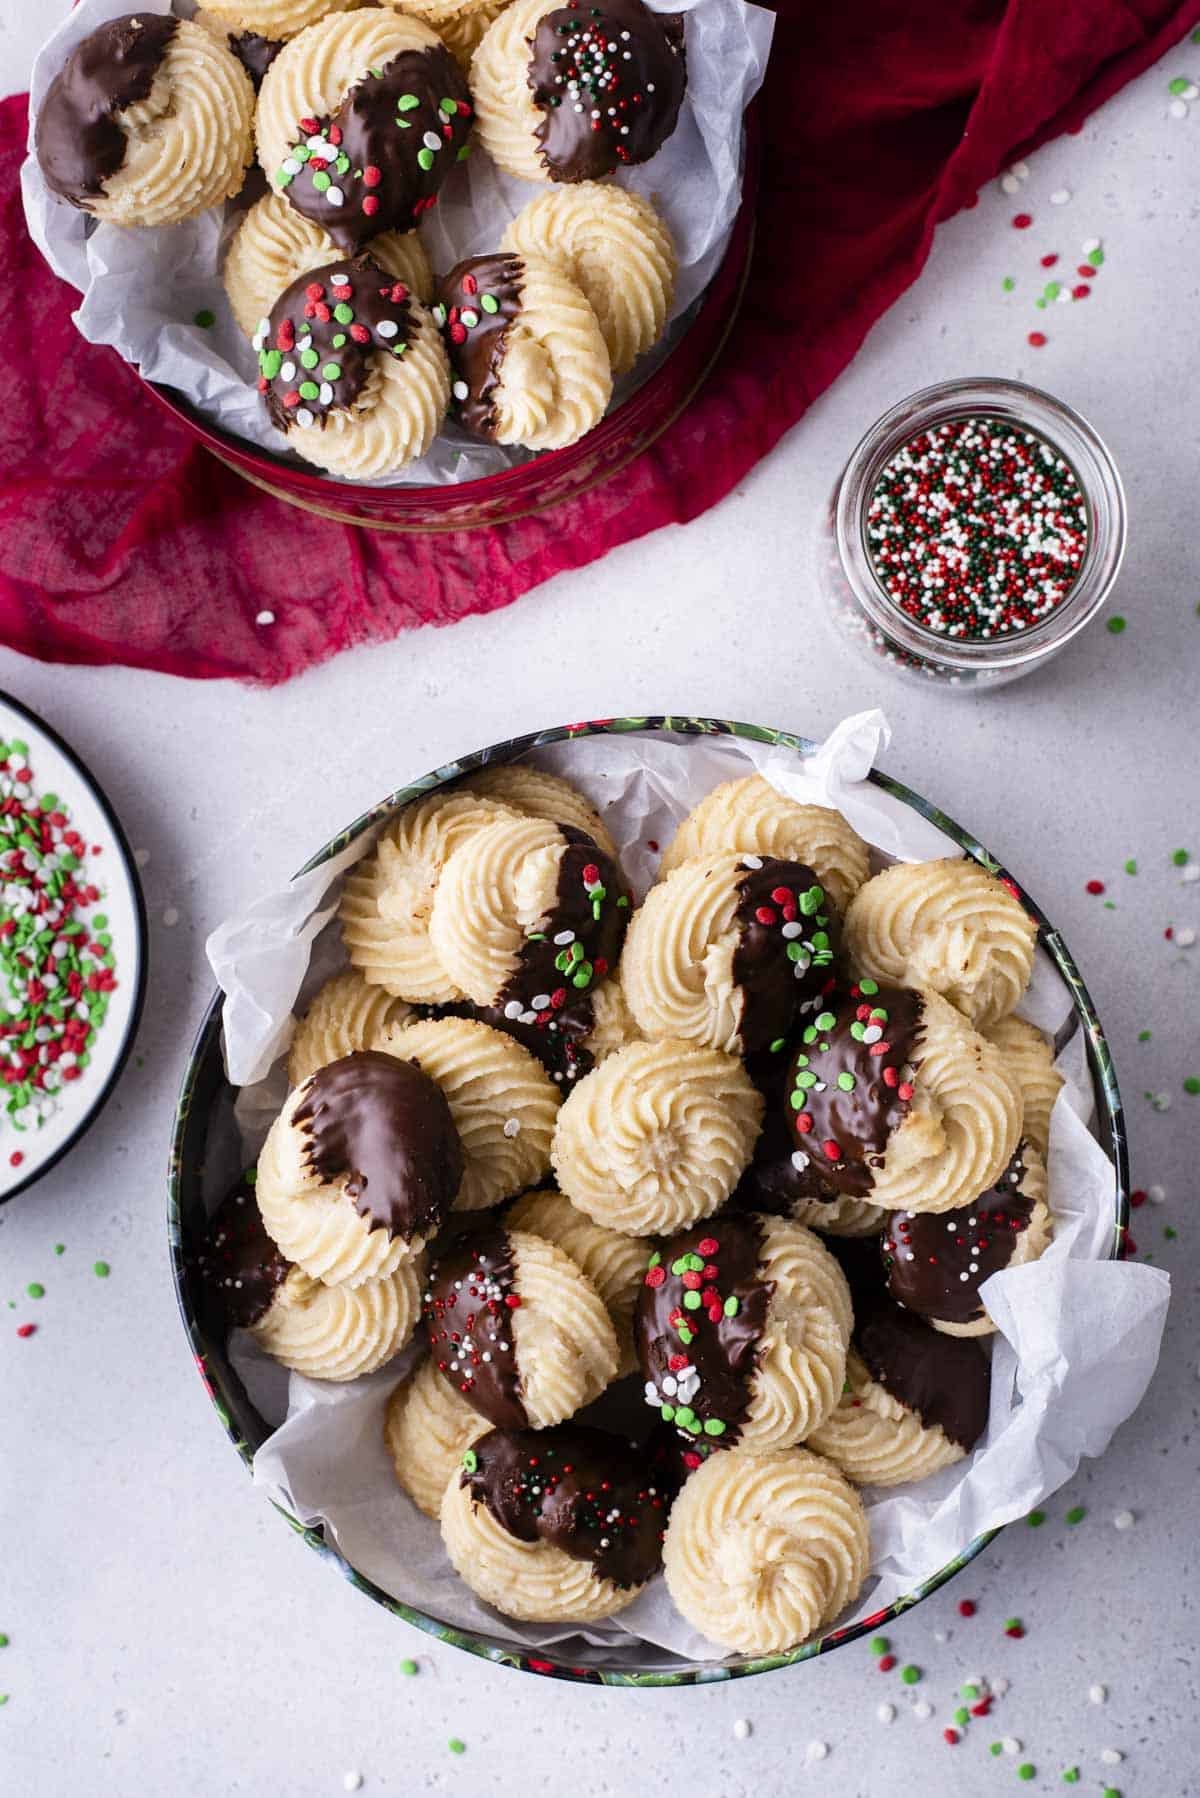 two christmas tins full of butter cookies with a bowl of sprinkles and a small glass dish of sprinkles. Some of the cookies are plain, some dipped in chocolate and some dipped in chocolate with red, green and white sprinkles